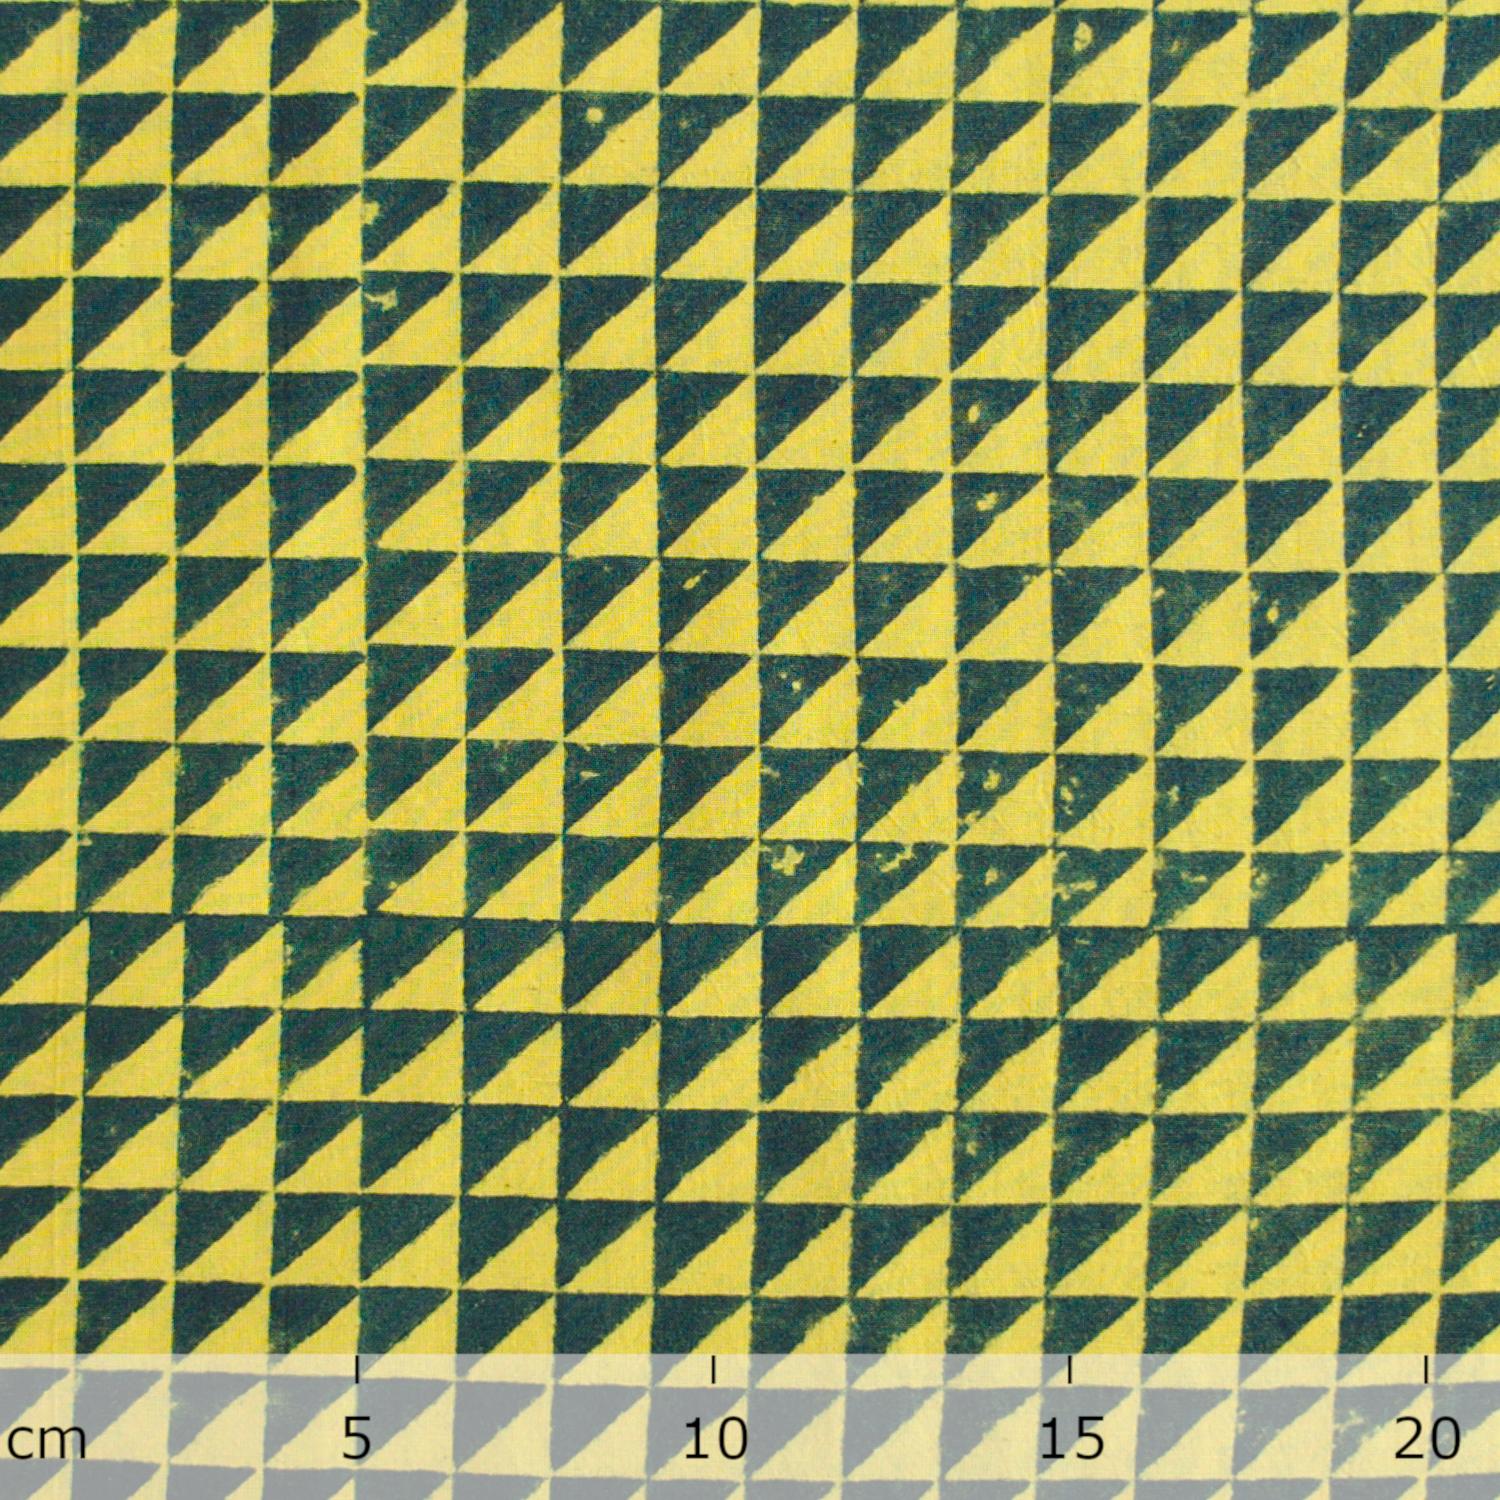 SIK27 - Block-Printed Cotton Fabric From India - Half Squares Design - Pomegranate Yellow and Green Indigo Dye - Ruler